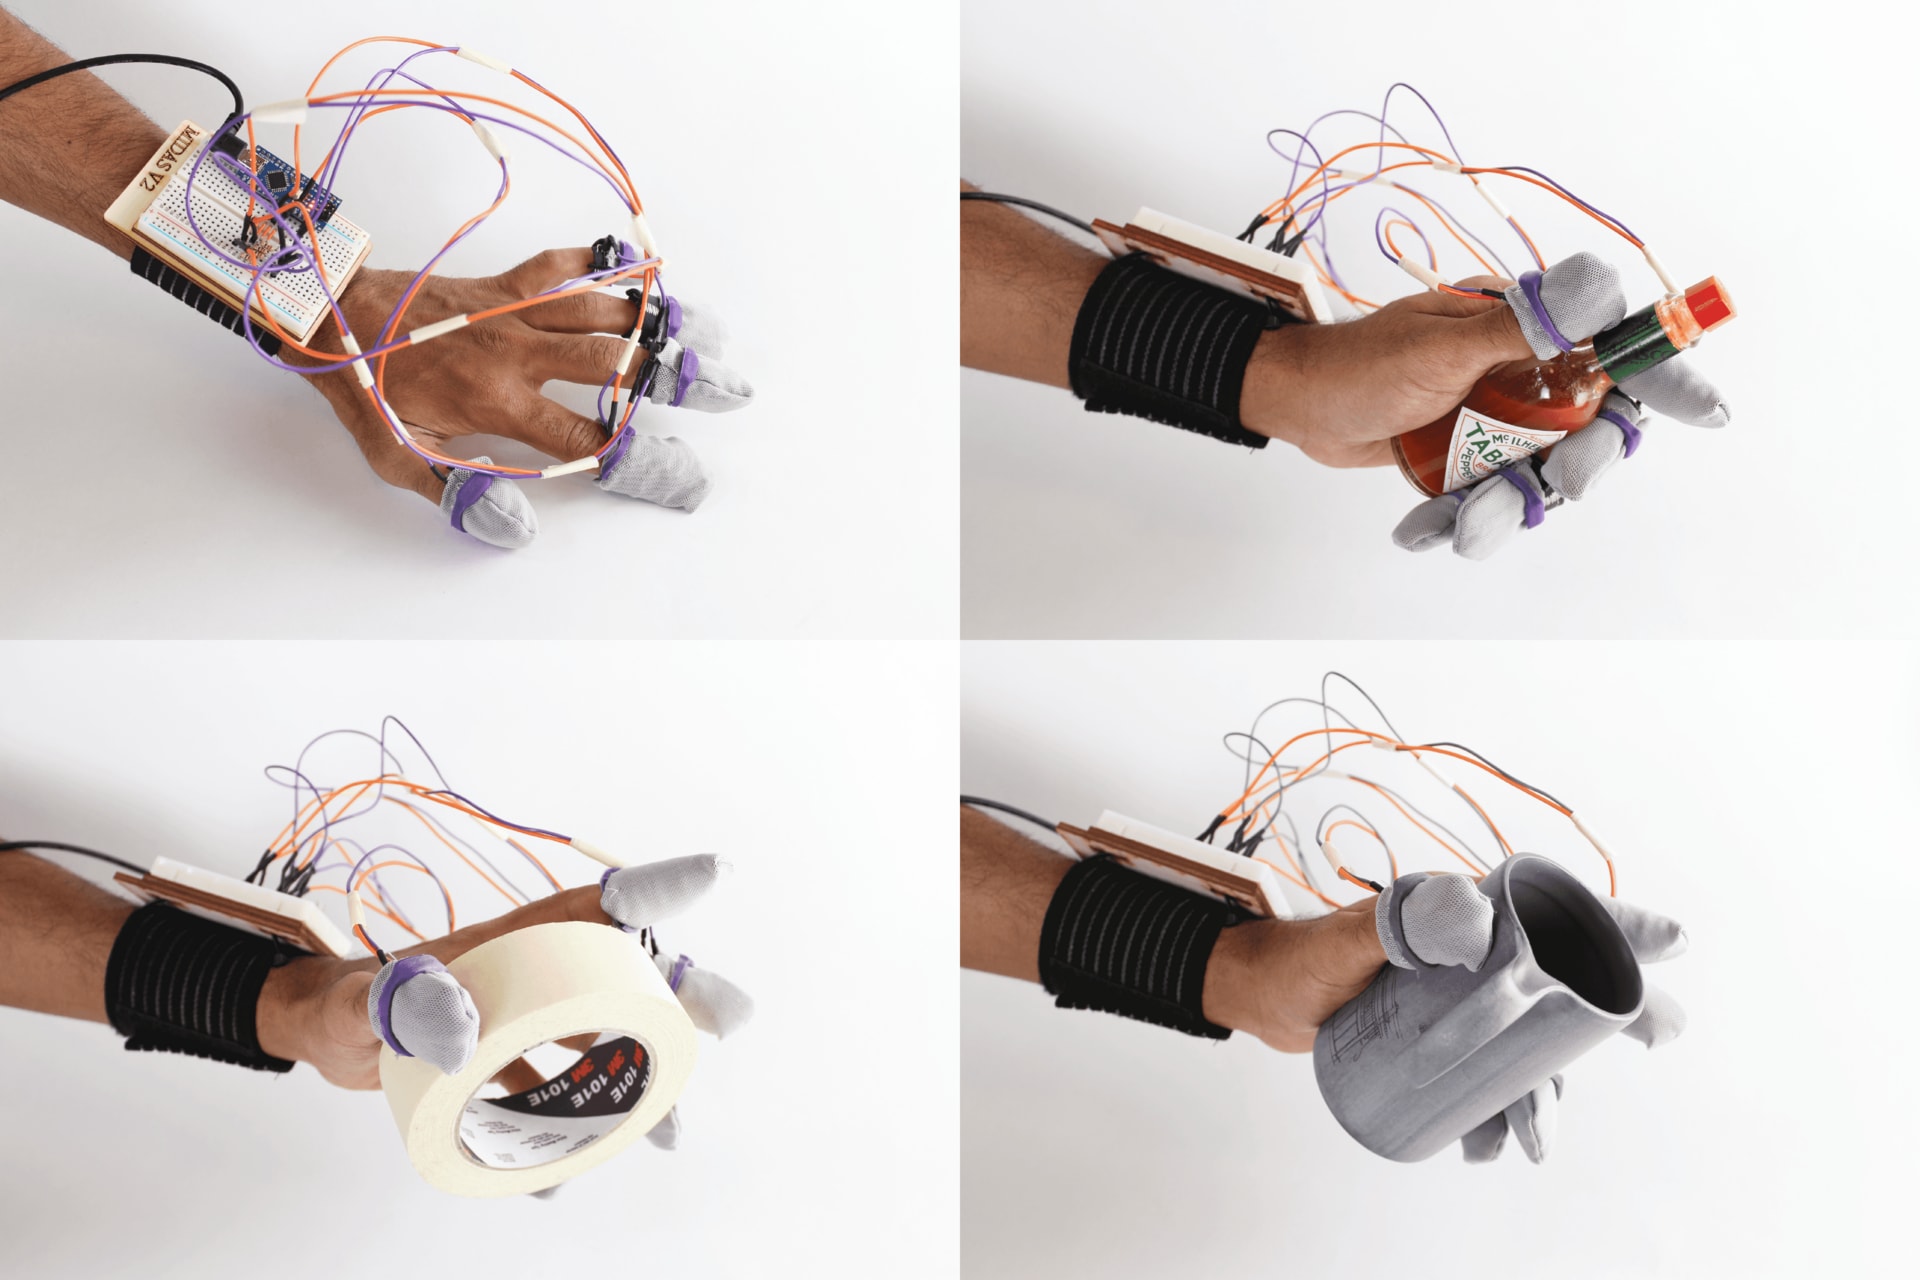 A hand wearing the controller and using different objects as a controller.